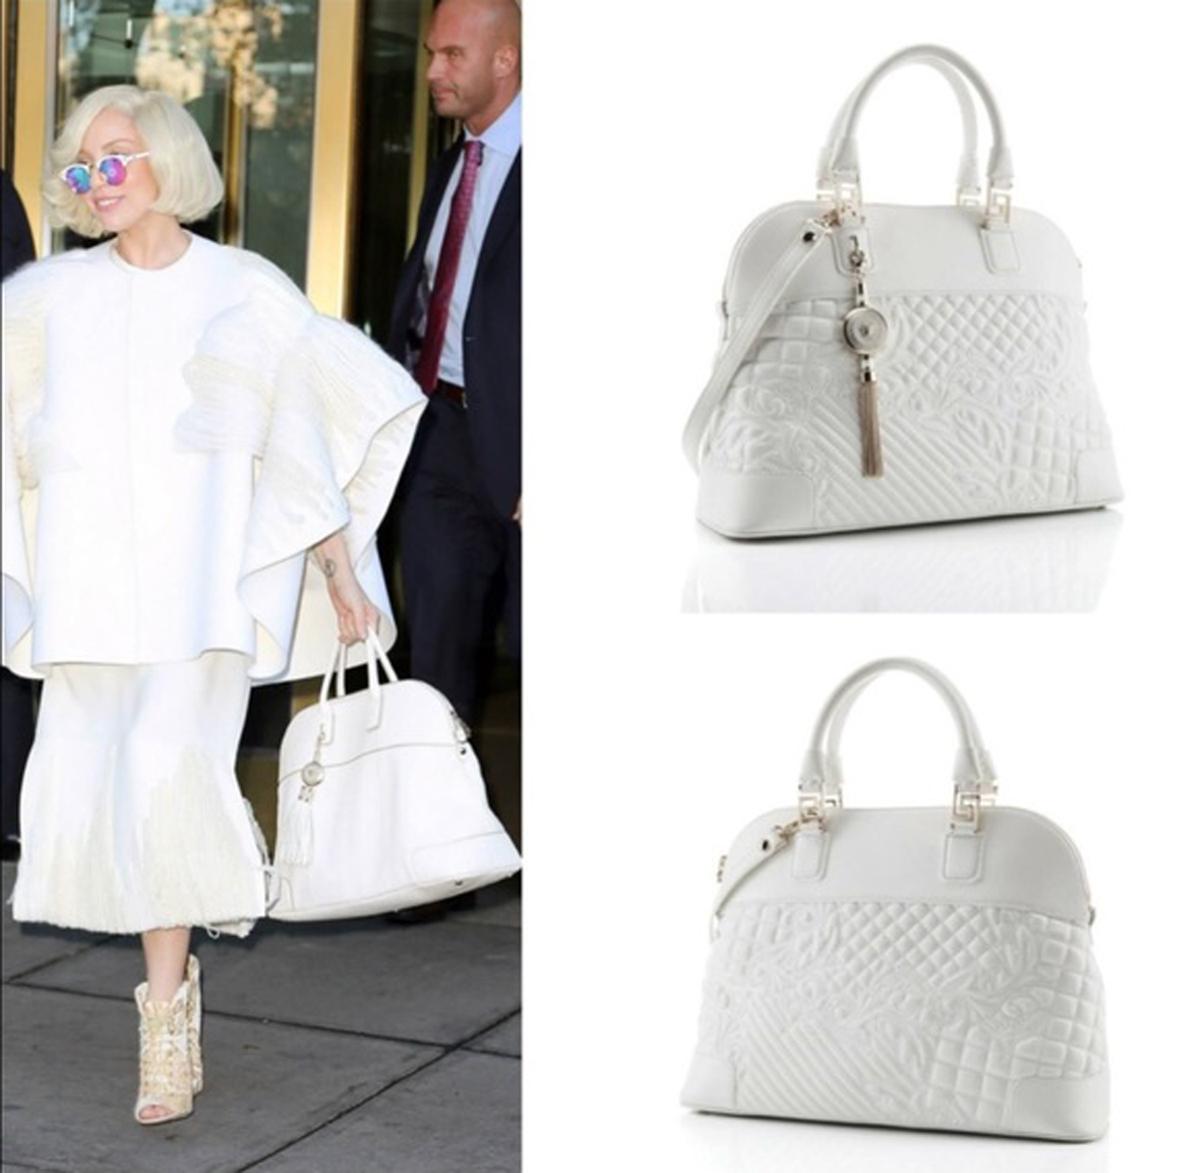 New Versace Nappa Leather Athena Barocco Quilted Vanitas Large Bag
All of the Handbags from Versace’s Vanitas Collection are Unmistakably Luxe.
Features optional shoulder/cross-body strap and detachable Versace logo bag charm.
100% White Color